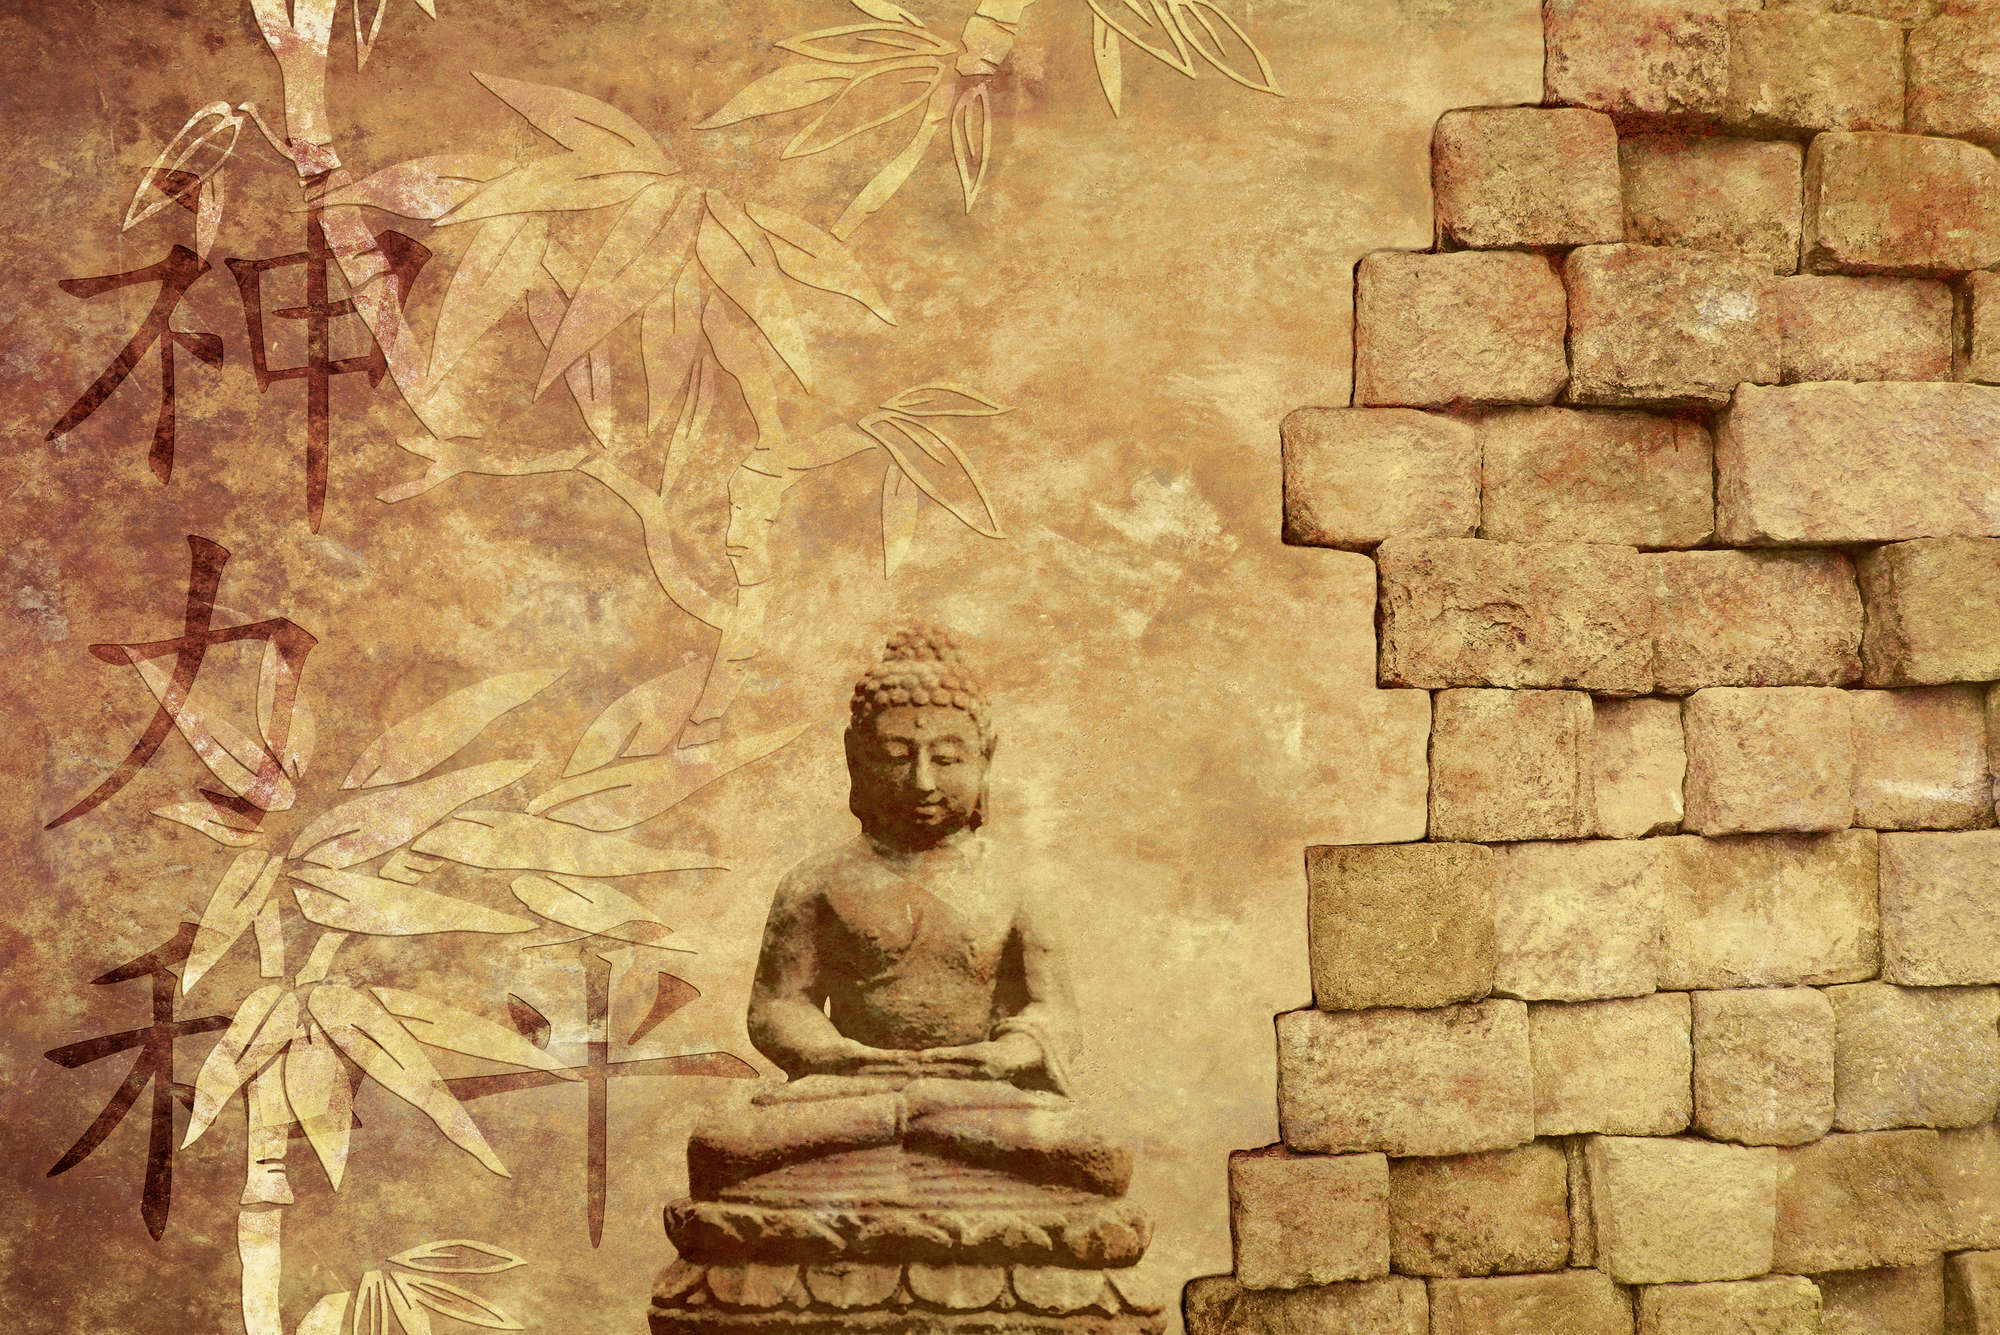             Photo wallpaper with Buddha figure - mother-of-pearl smooth fleece
        